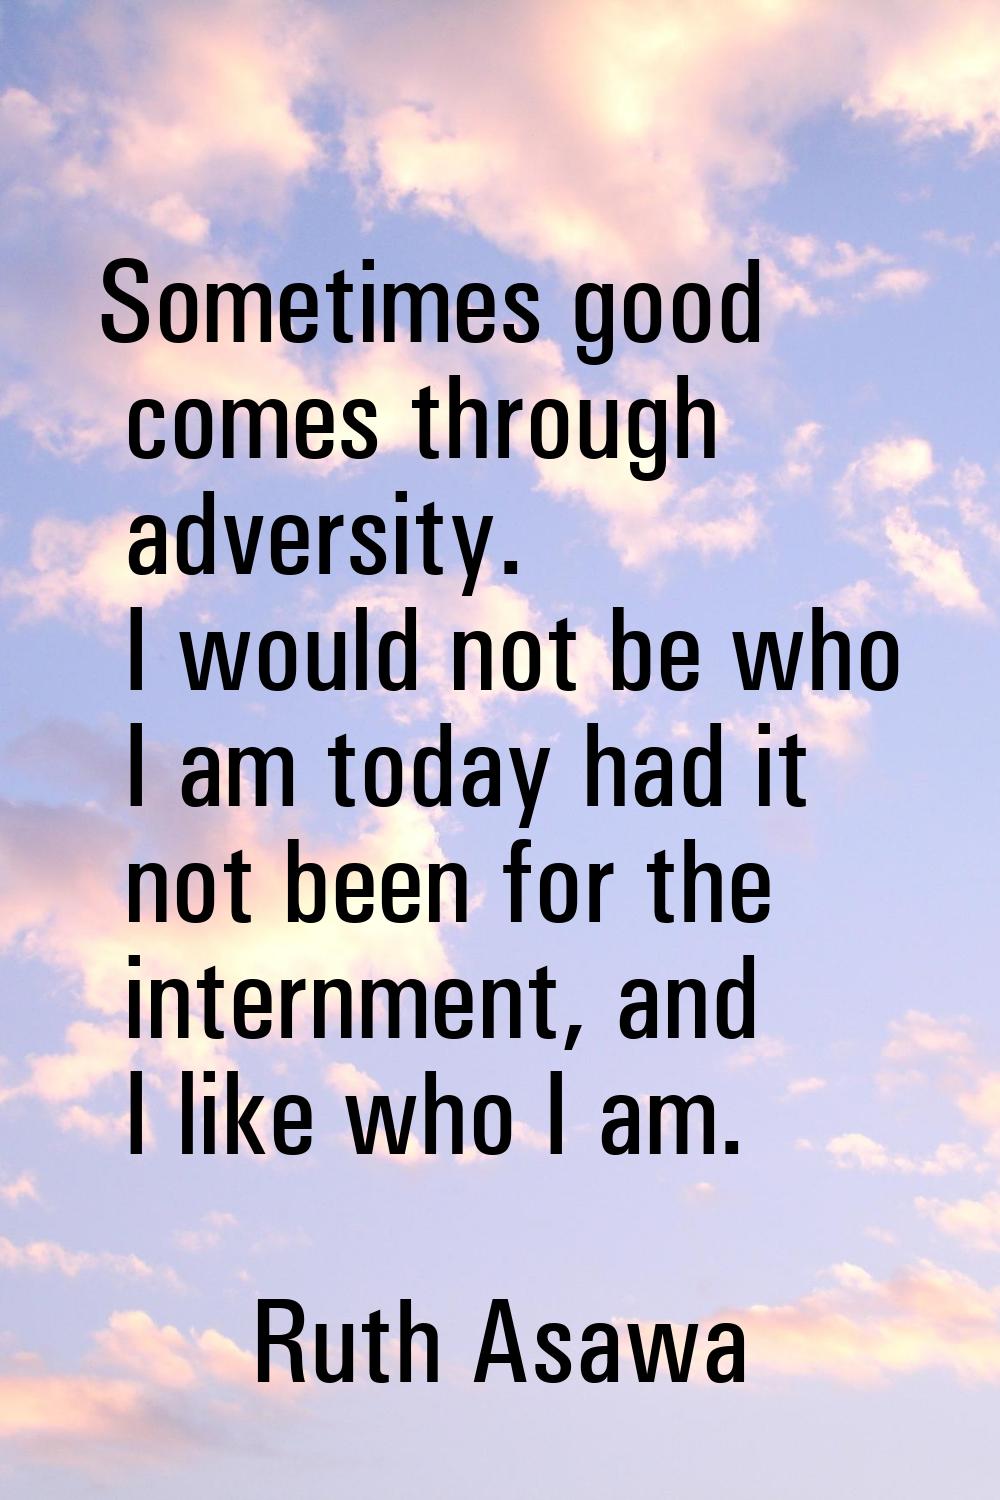 Sometimes good comes through adversity. I would not be who I am today had it not been for the inter